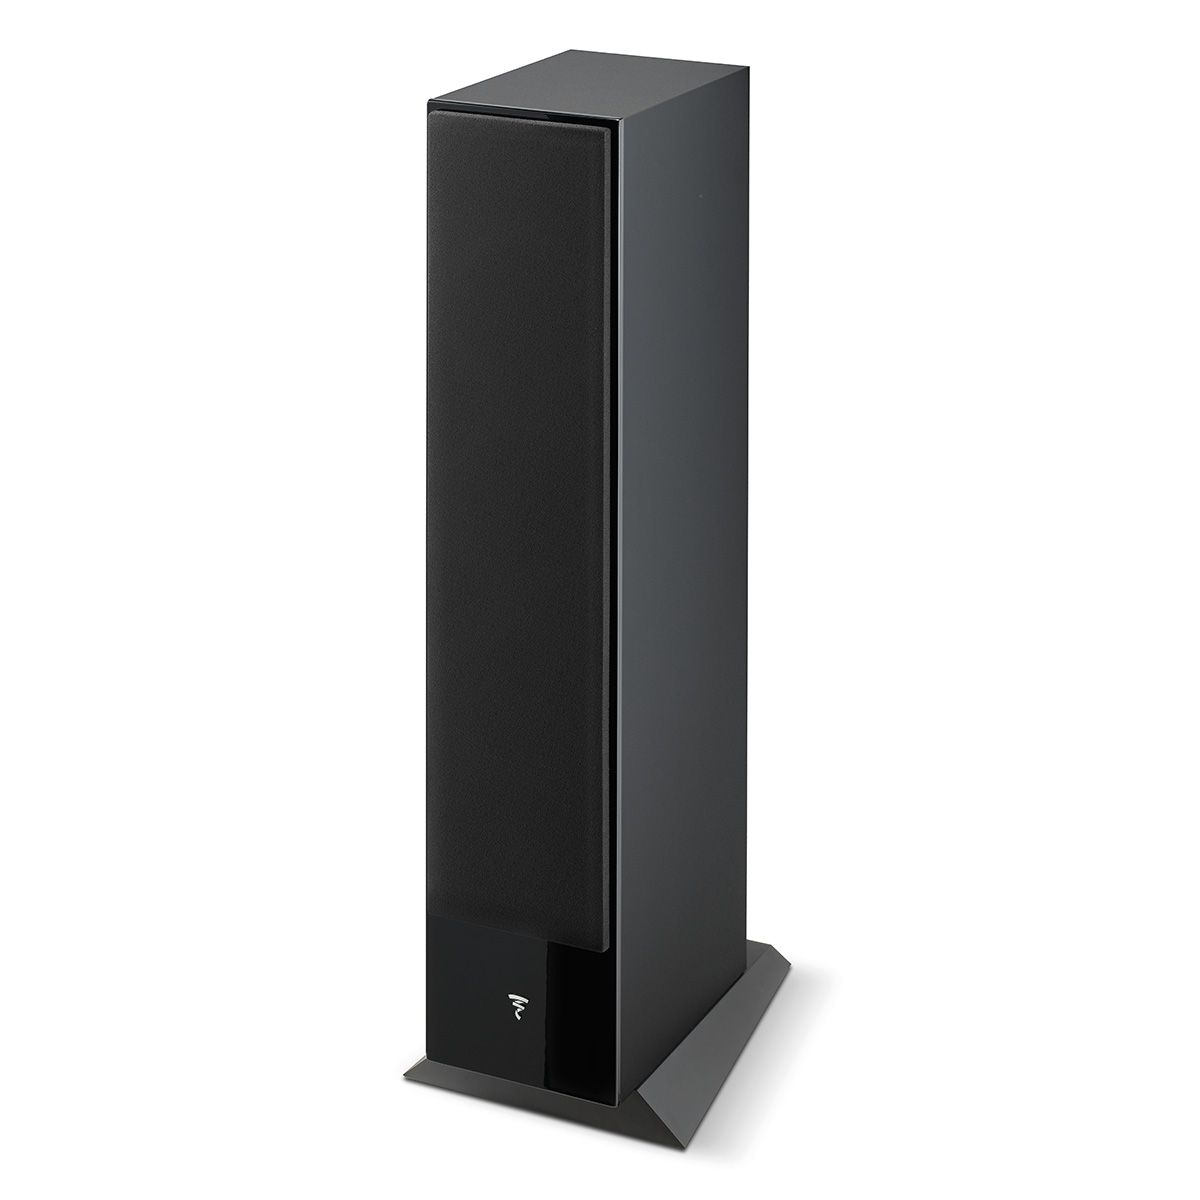 Focal Theva No2 Floorstanding Speaker - Each - angled right front view with grille